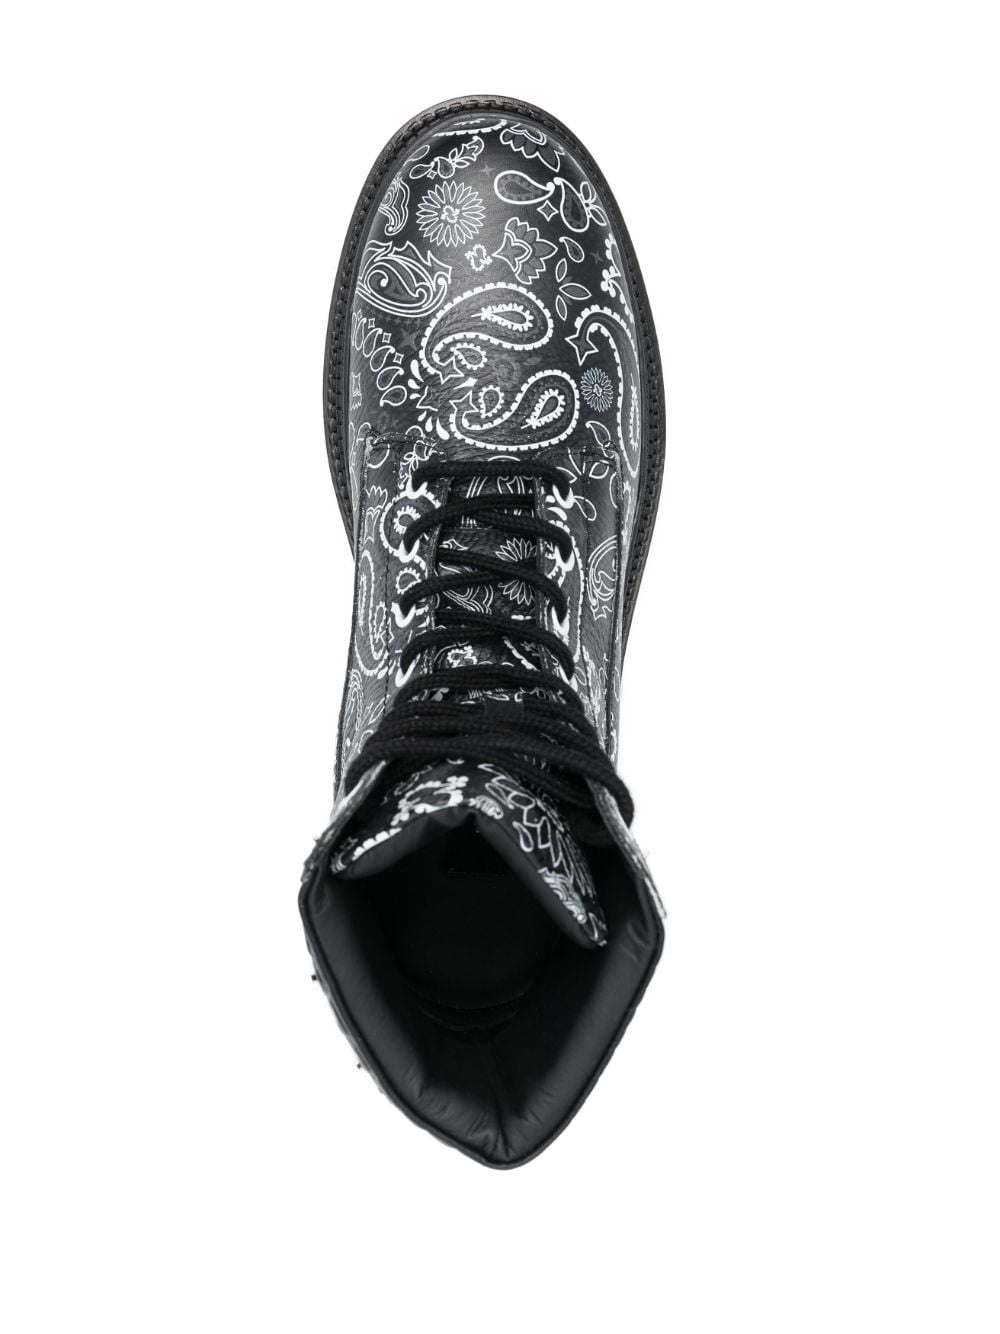 paisley-print leather ankle boots - 4